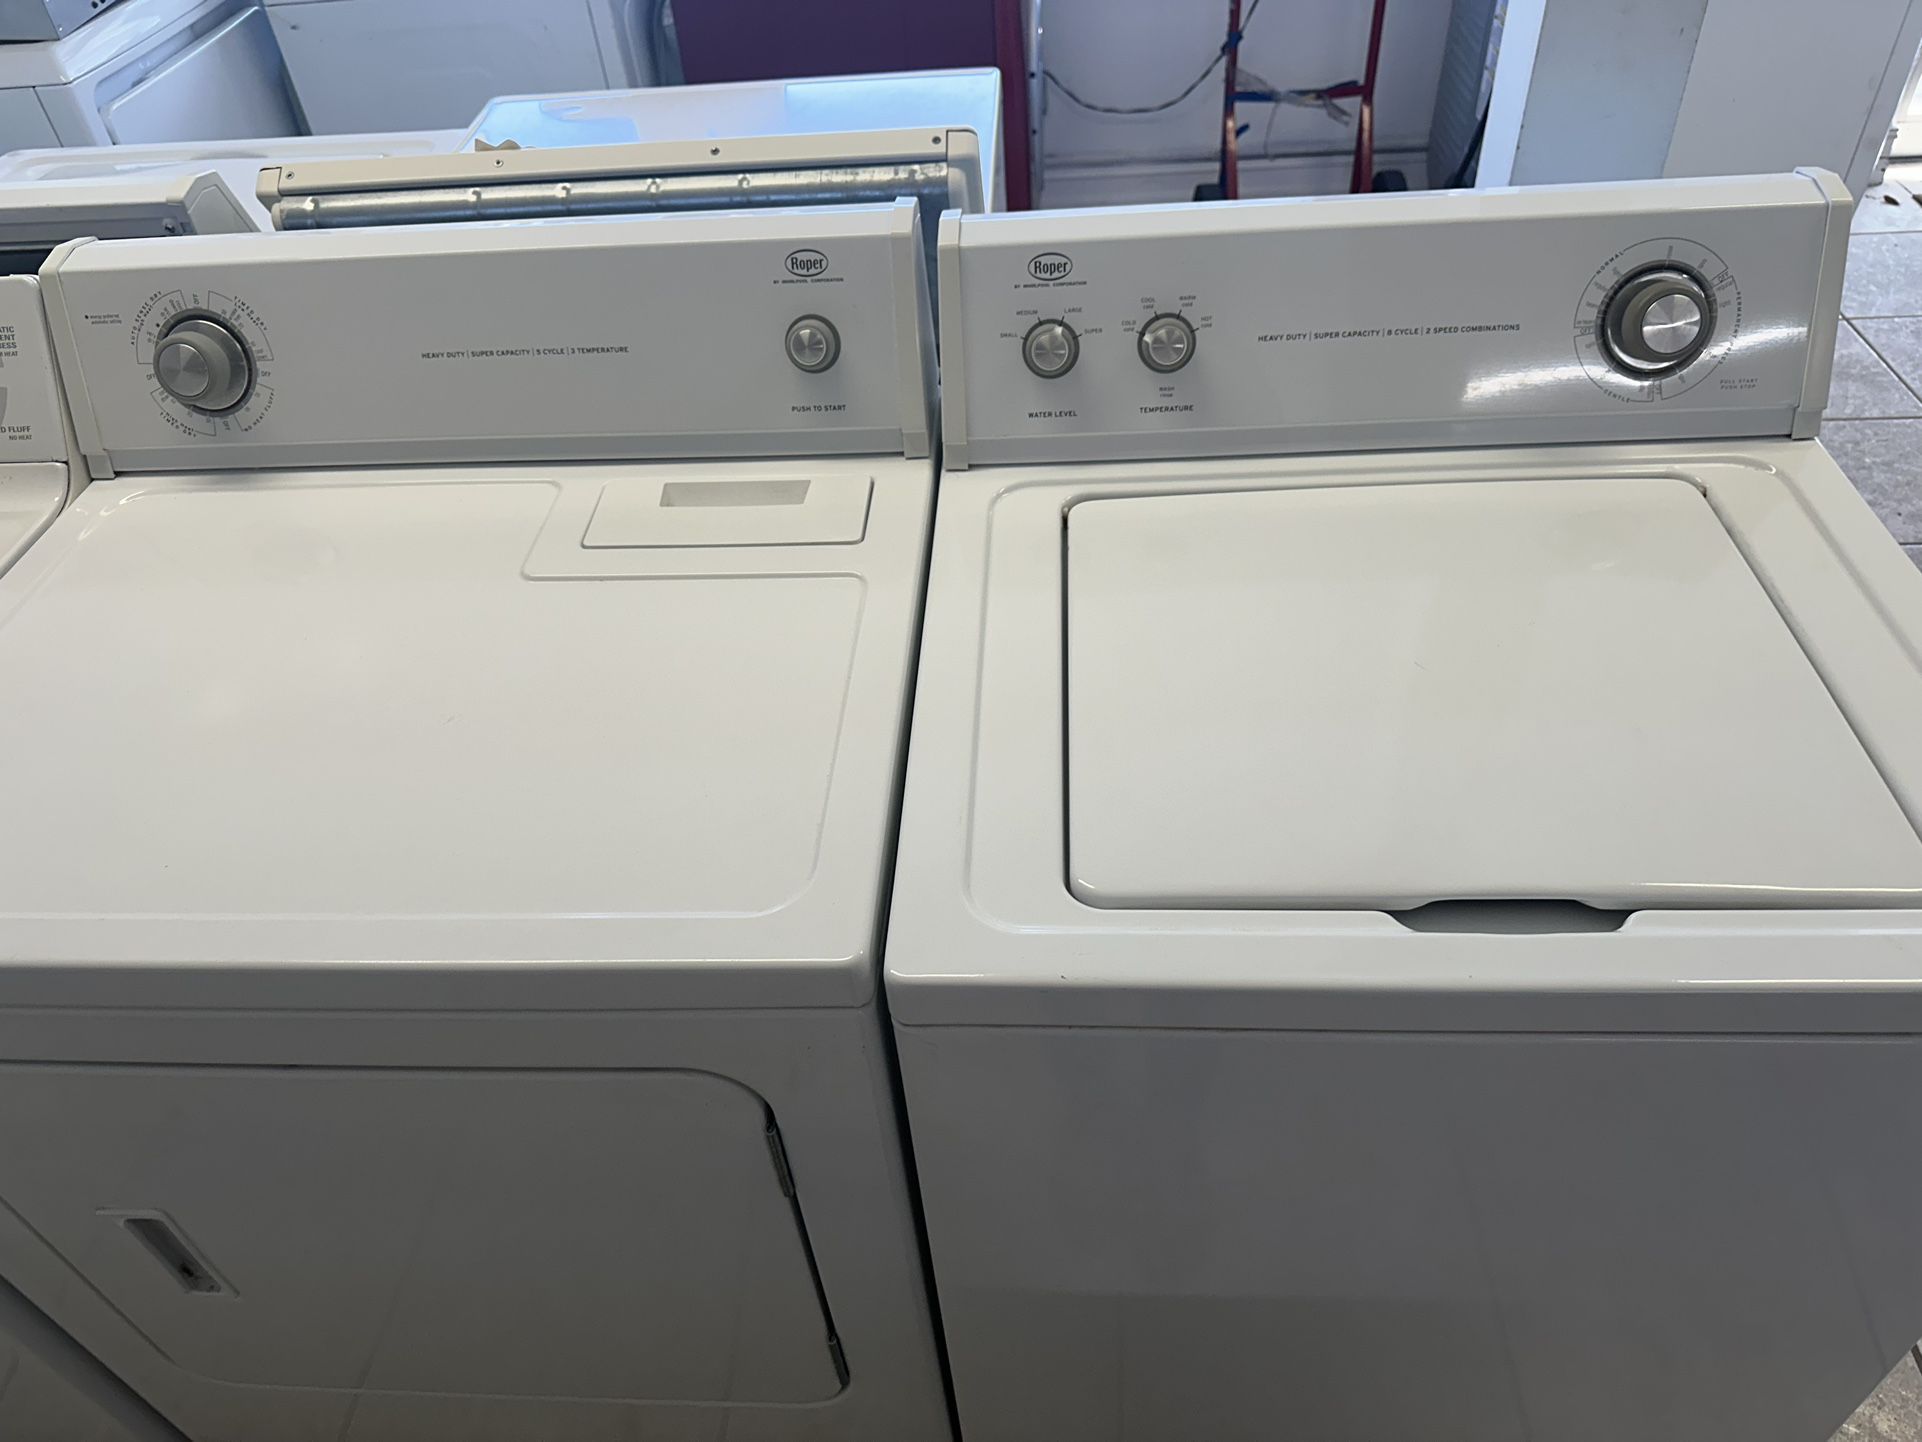 Roper Washer And Dryer Set